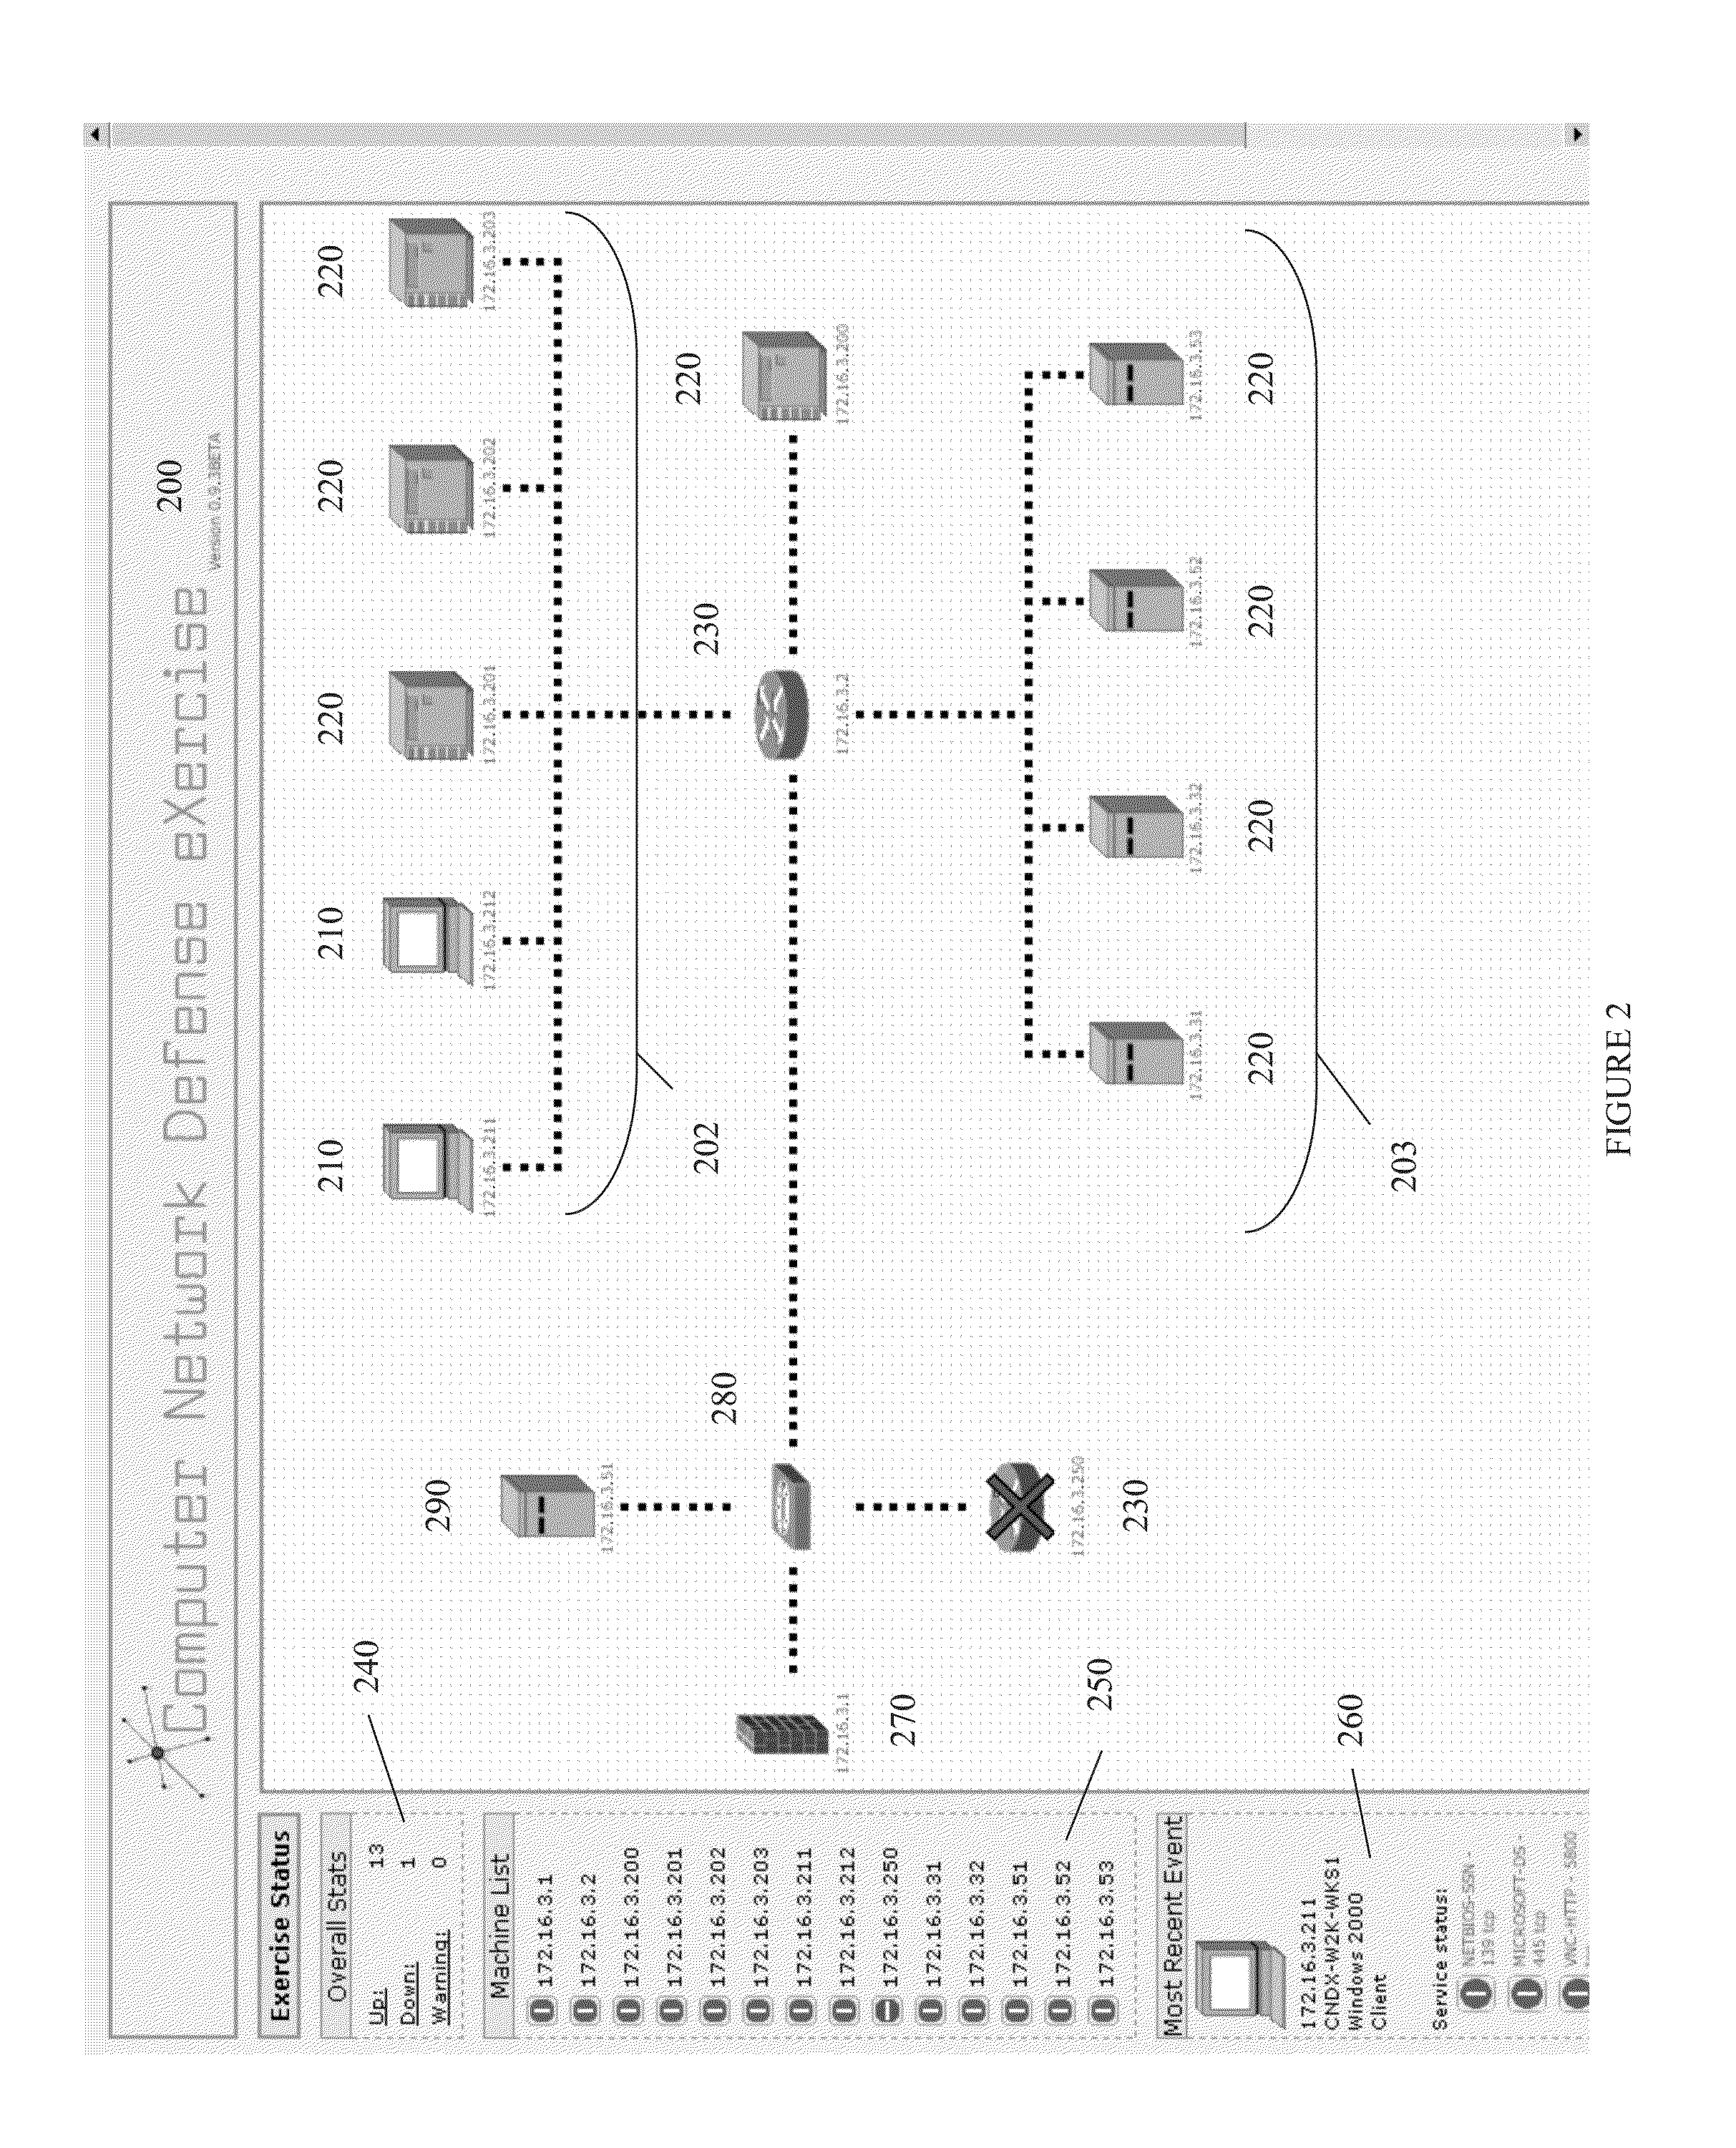 Systems and methods for implementing and scoring computer network defense exercises